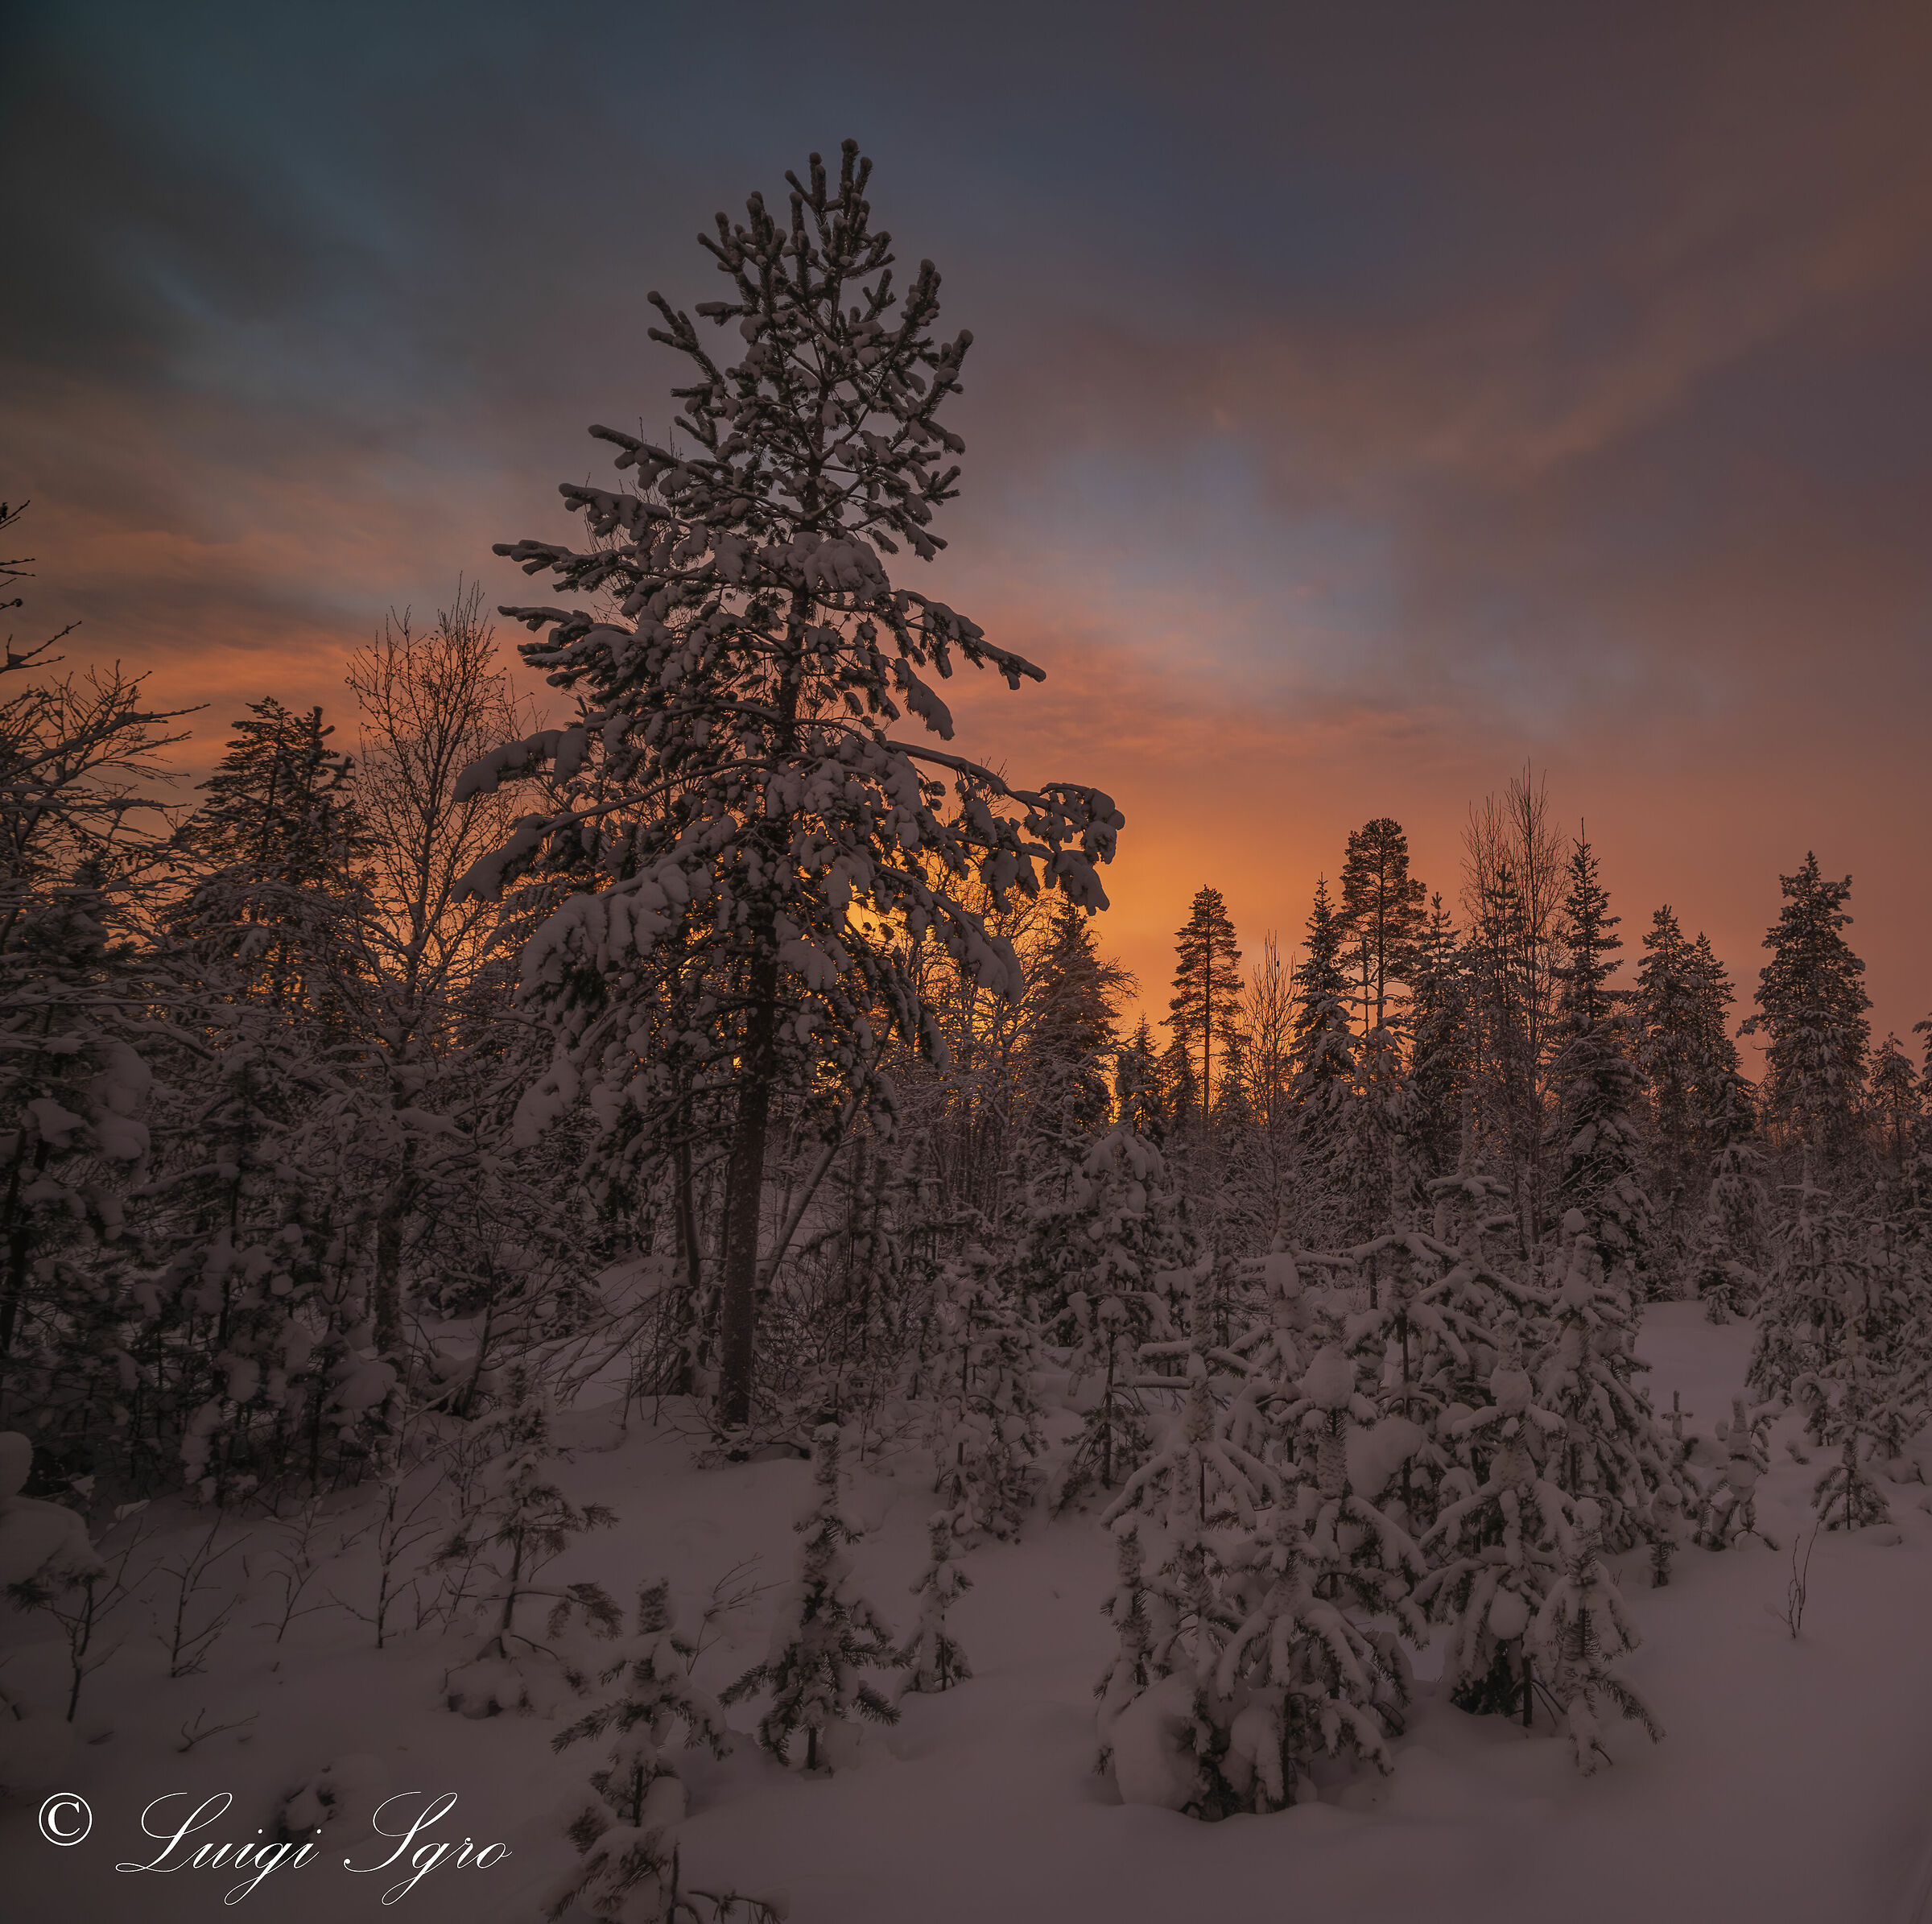 Almost constant sunset in the boreal forest ...